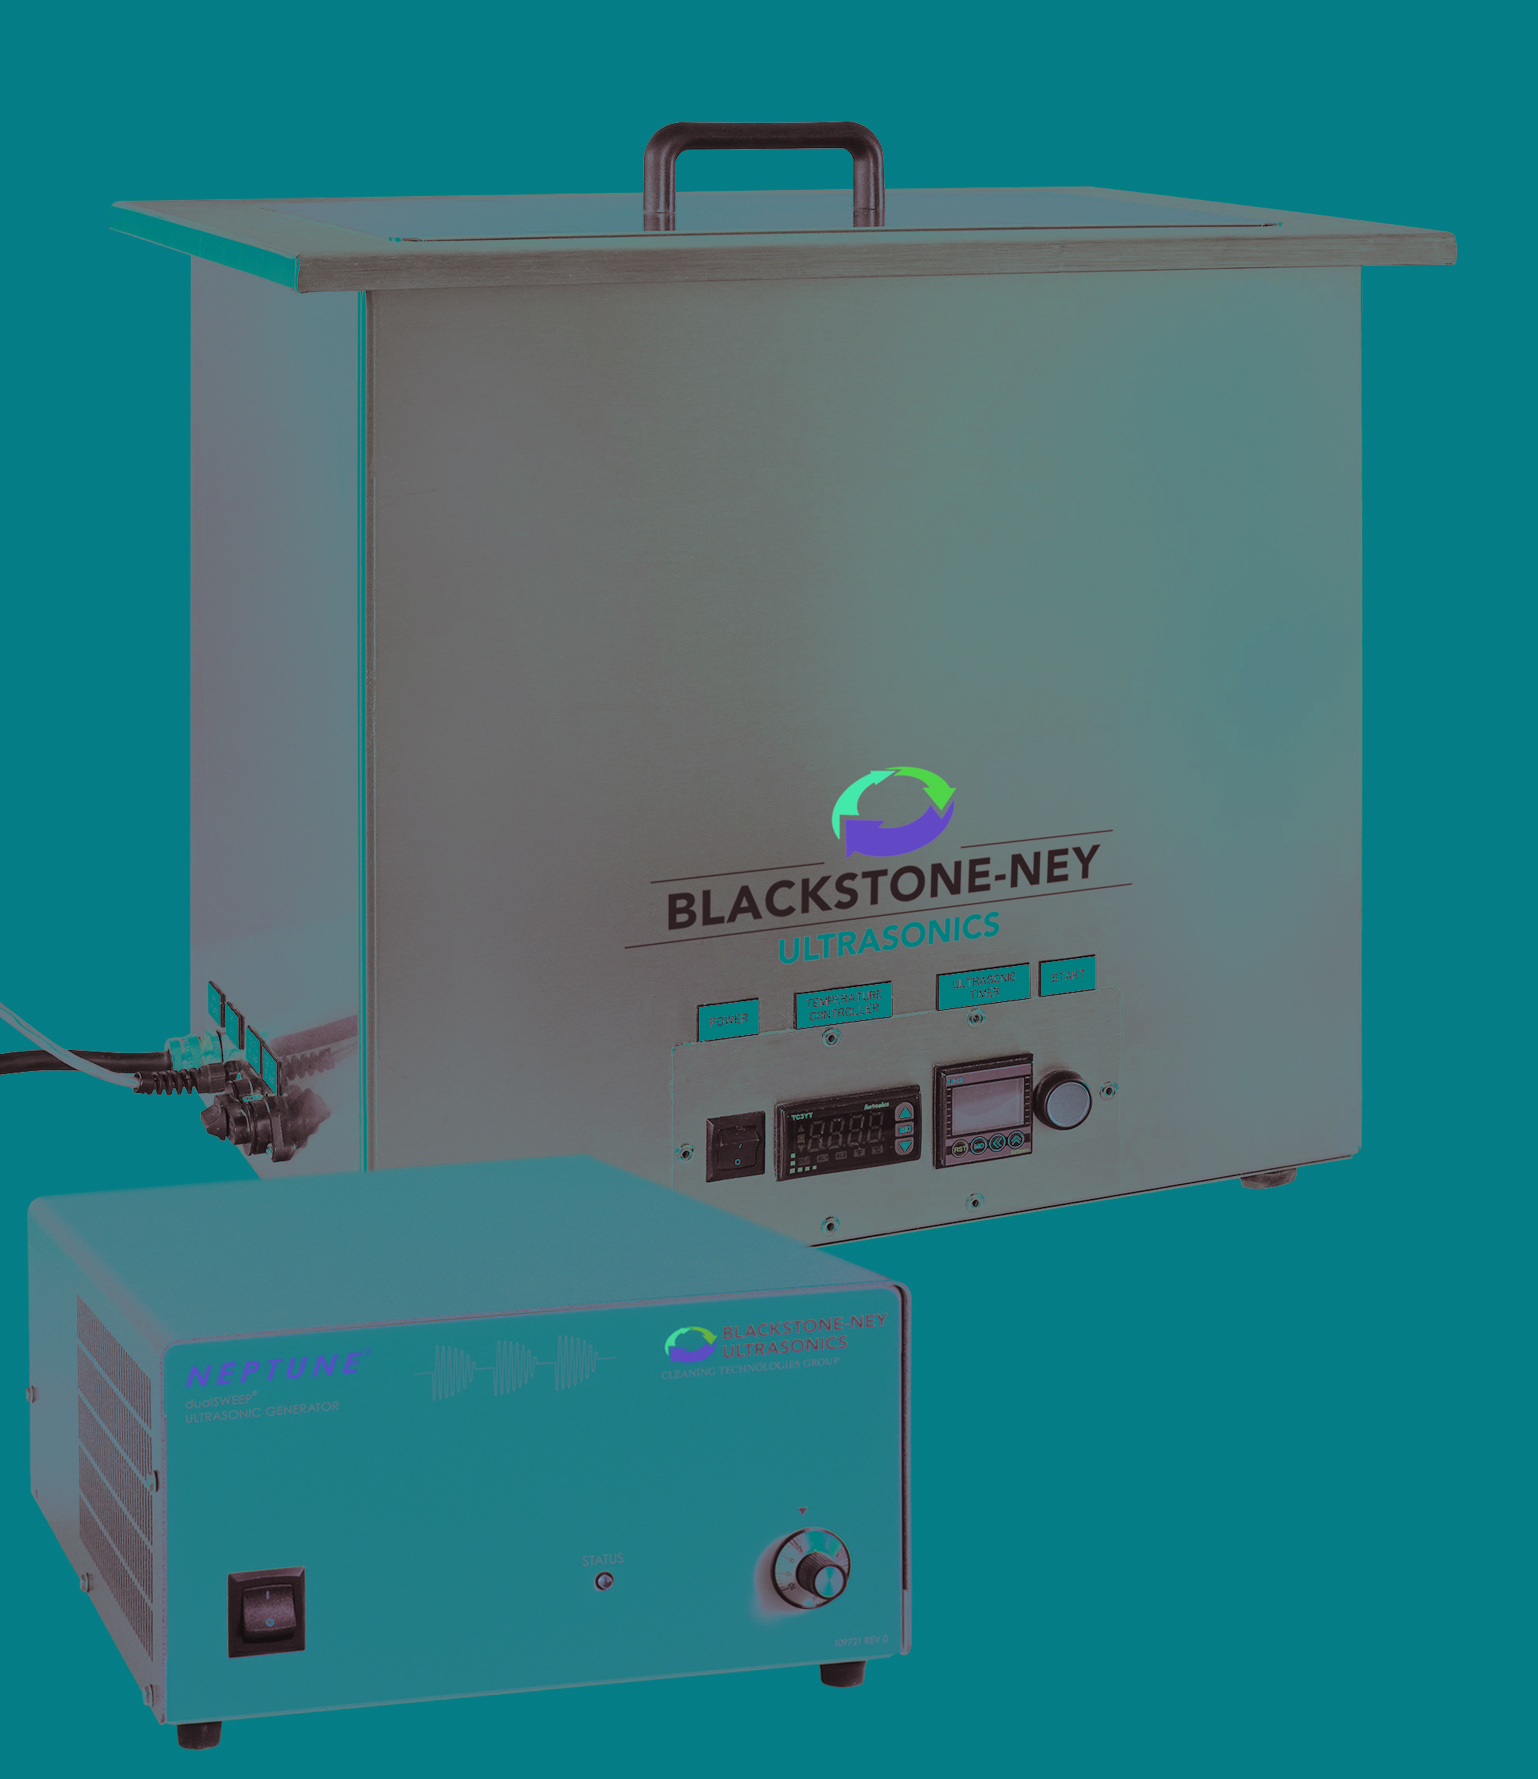 BLACKSTONE-NEY ULTRASONICS INTRODUCES NEW CLEANING SOLUTIONS AT SPIE PHOTONICS WEST.